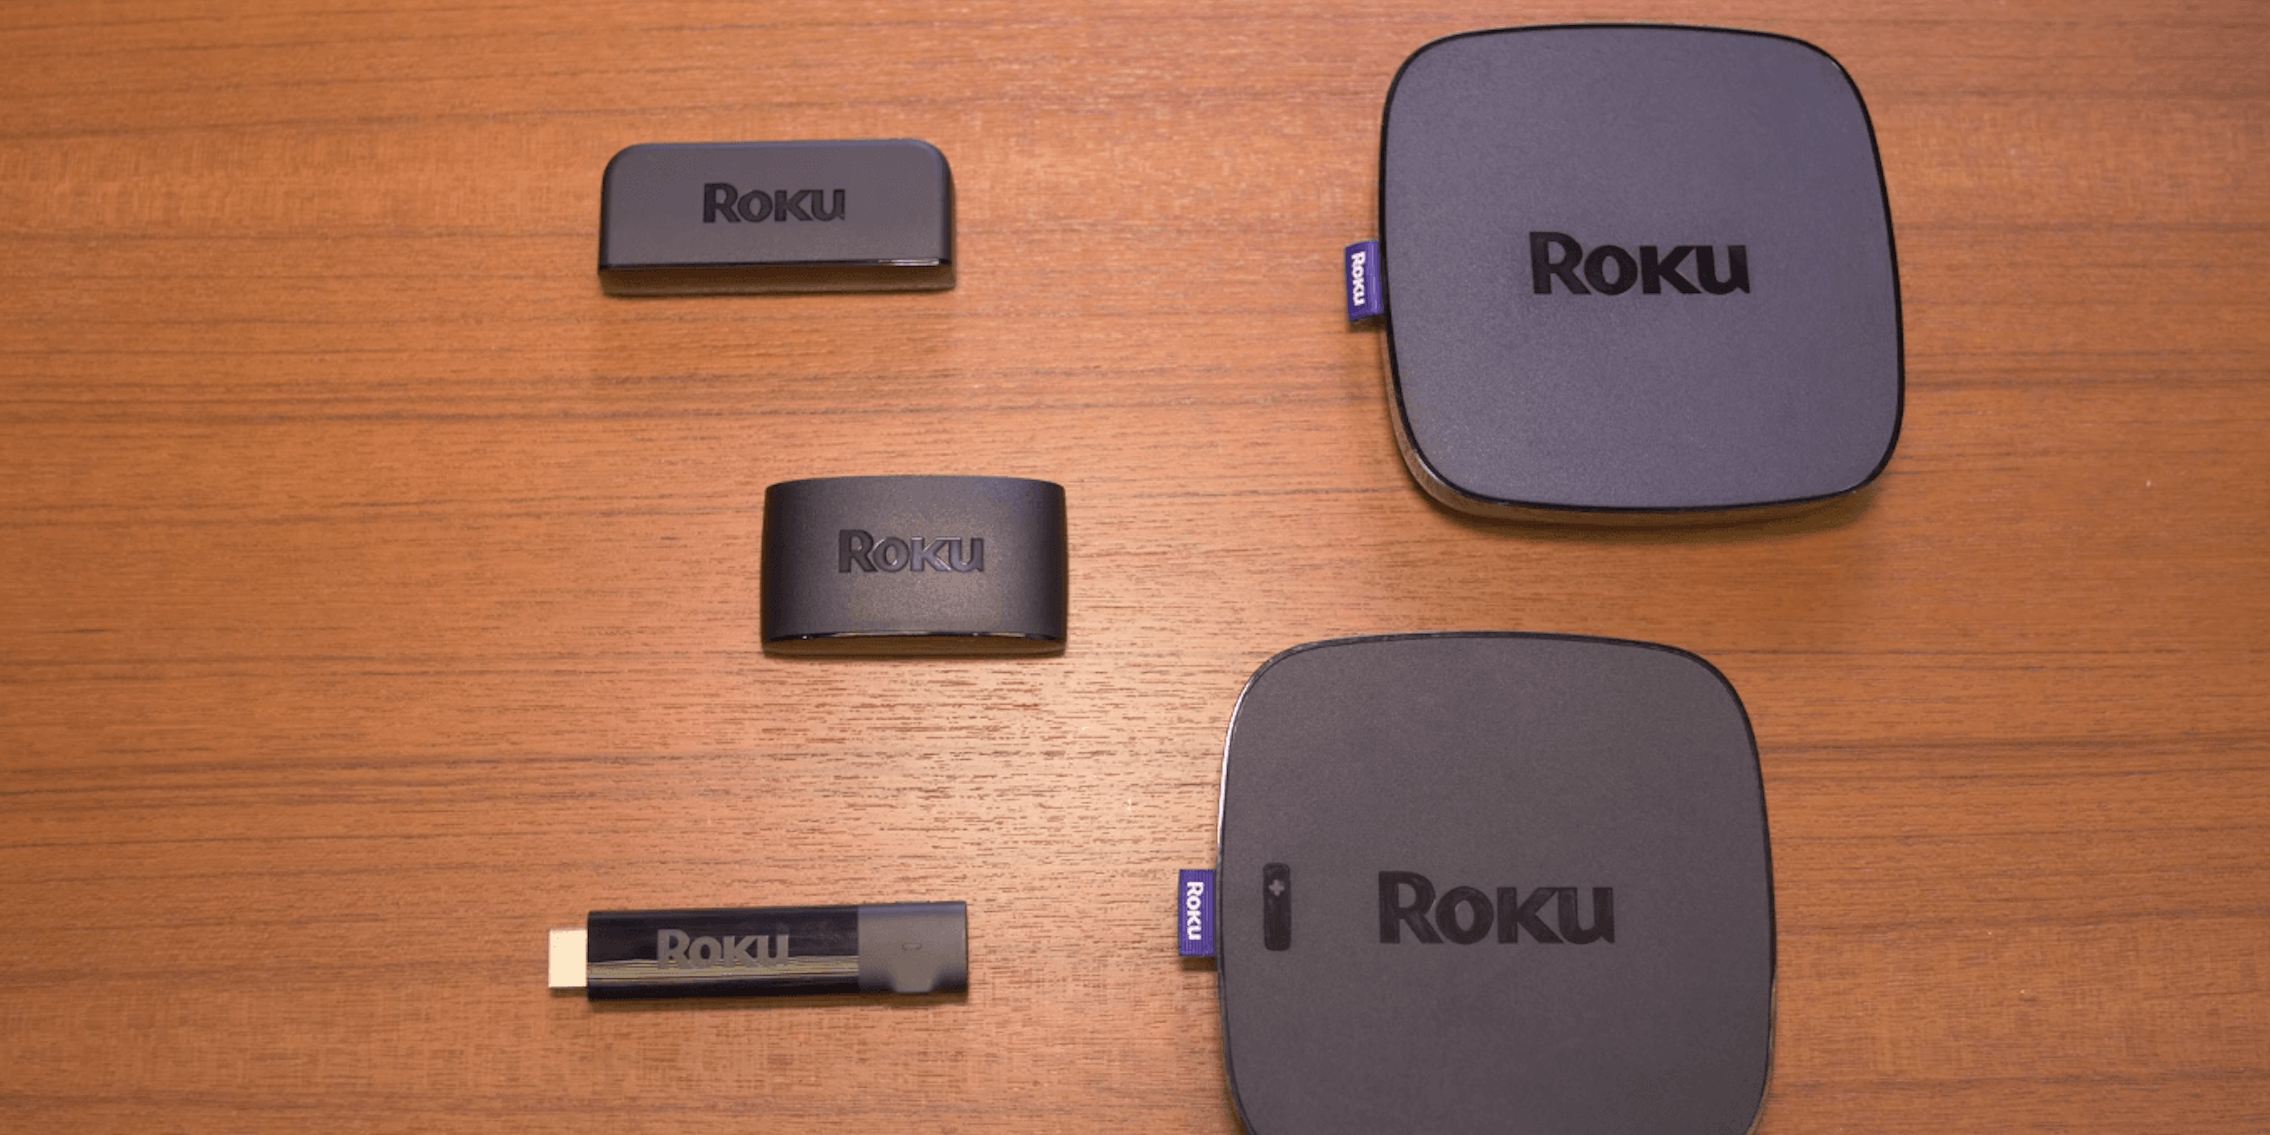 local_channels_on_roku